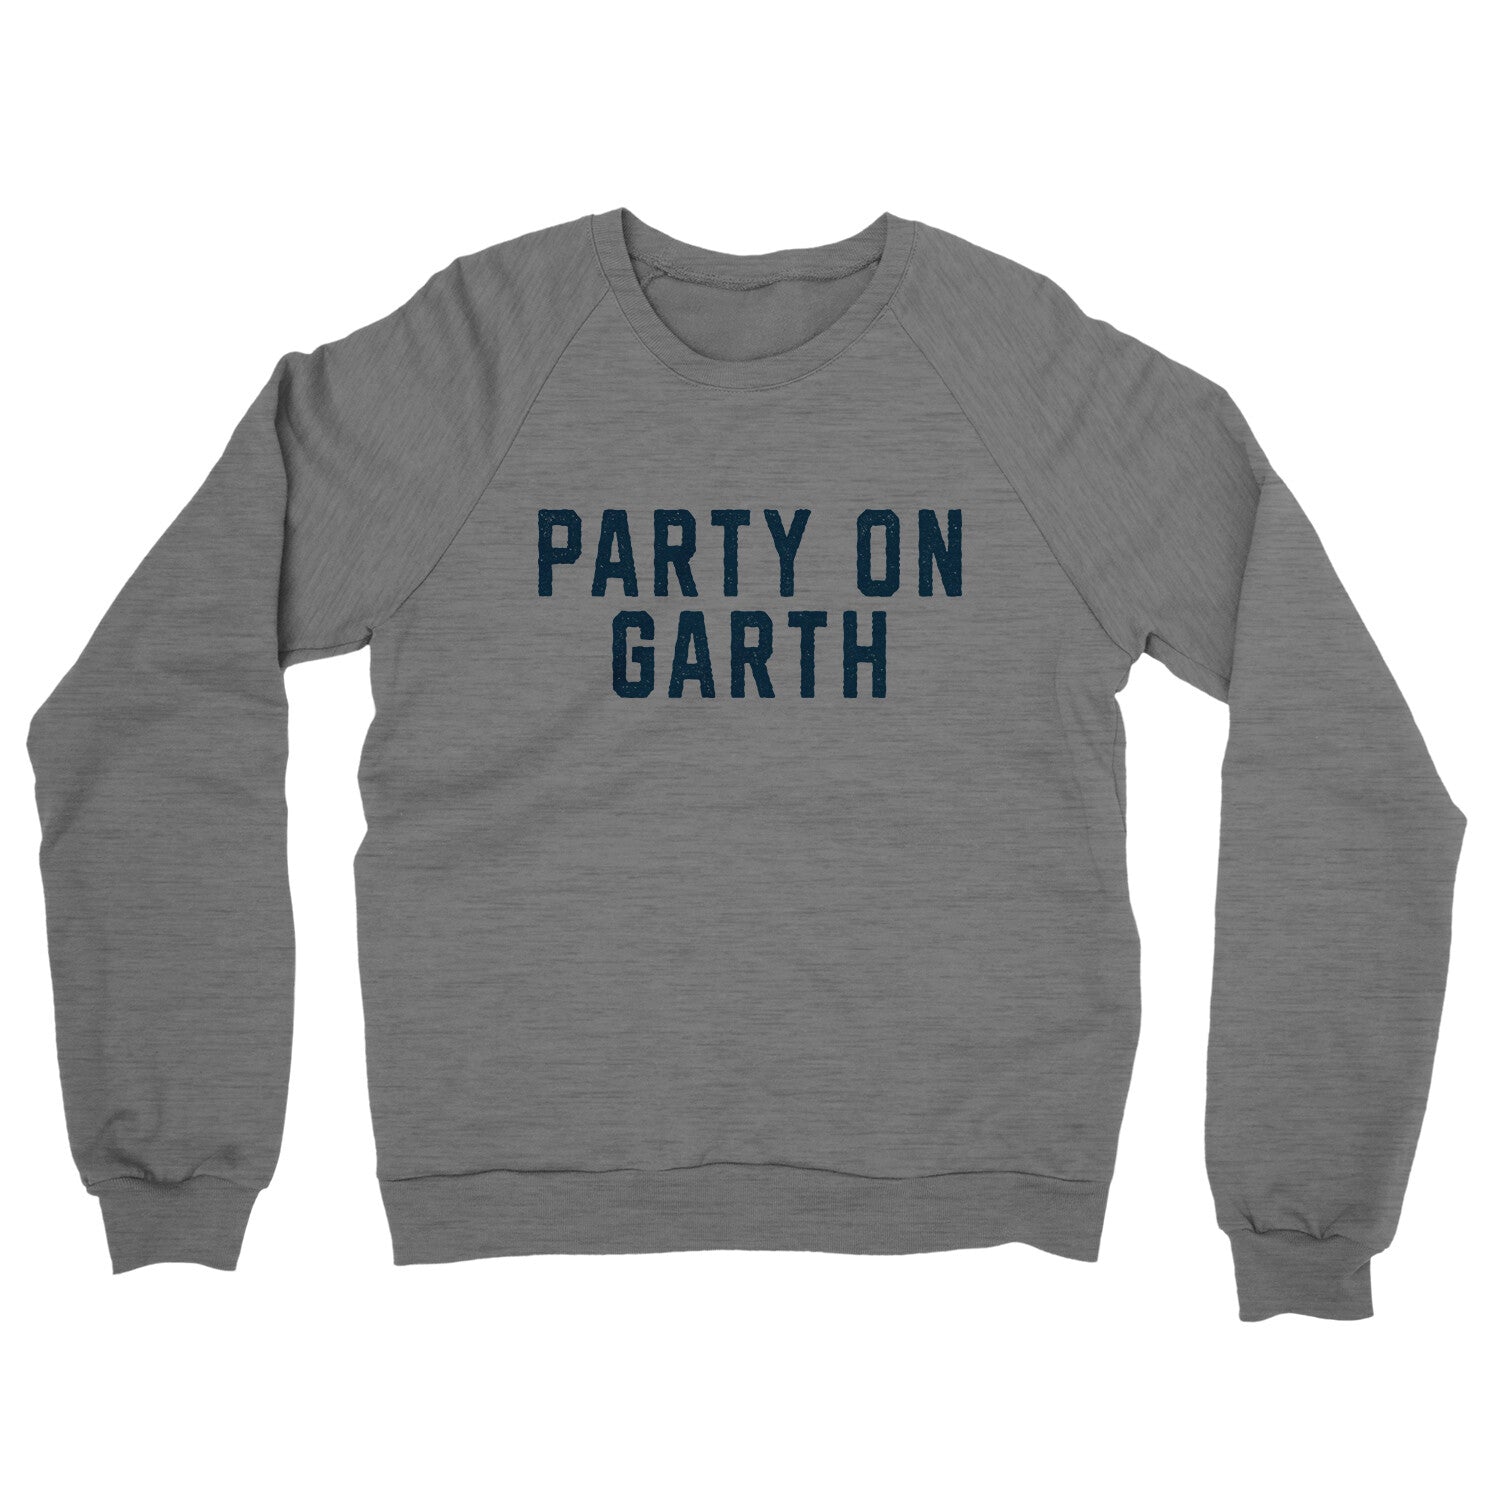 Party on Garth in Graphite Heather Color